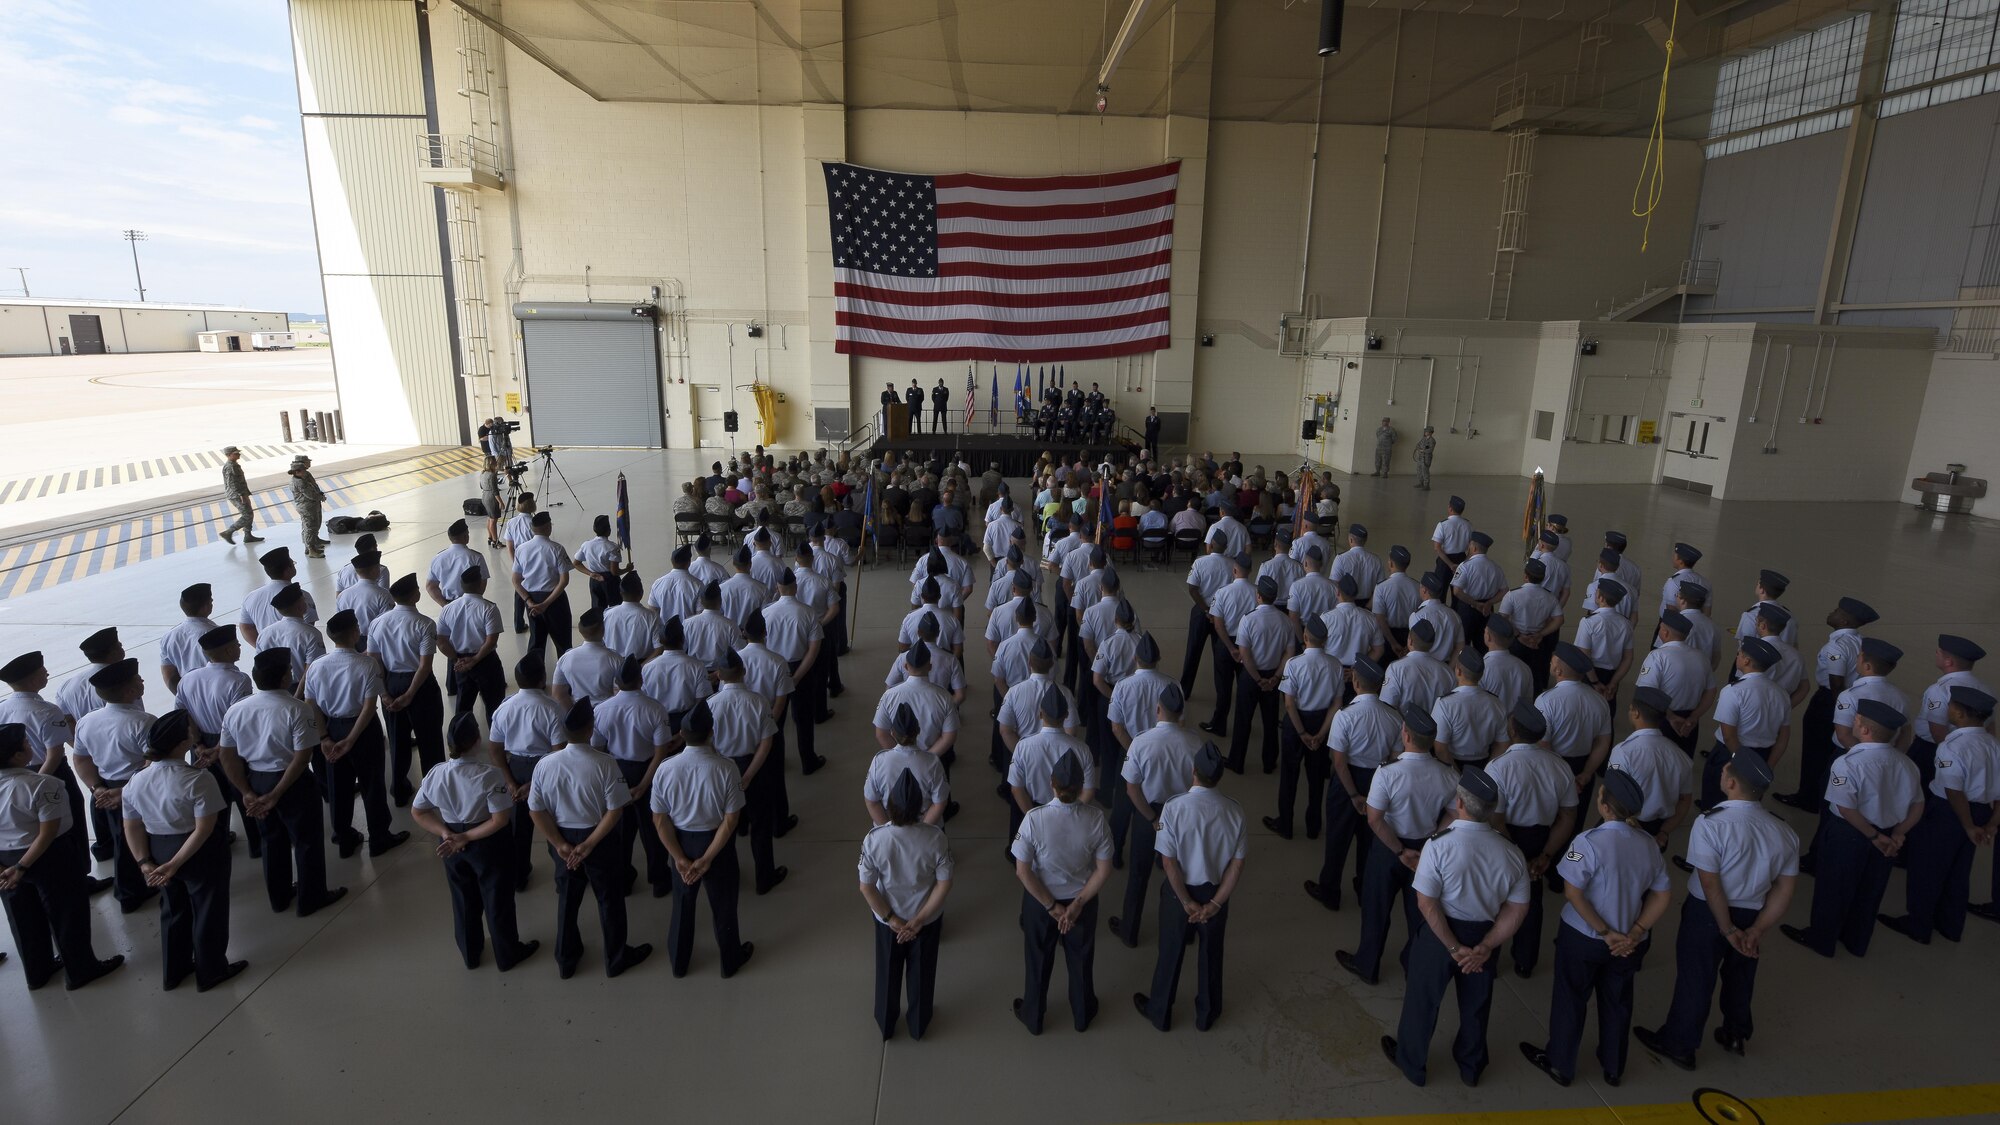 U.S. Air Force Airmen assigned to the 317th Airlift Group stand in formation during the 317th Airlift Wing activation ceremony at Dyess Air Force Base, Texas, July 6, 2017. In addition to Team Dyess members, civic leaders, community partners, distinguished guests and family members attended the deactivation of the 317th AG and activation of the 317th AW. (U.S. Air Force photo by Senior Airman Kedesha Pennant)